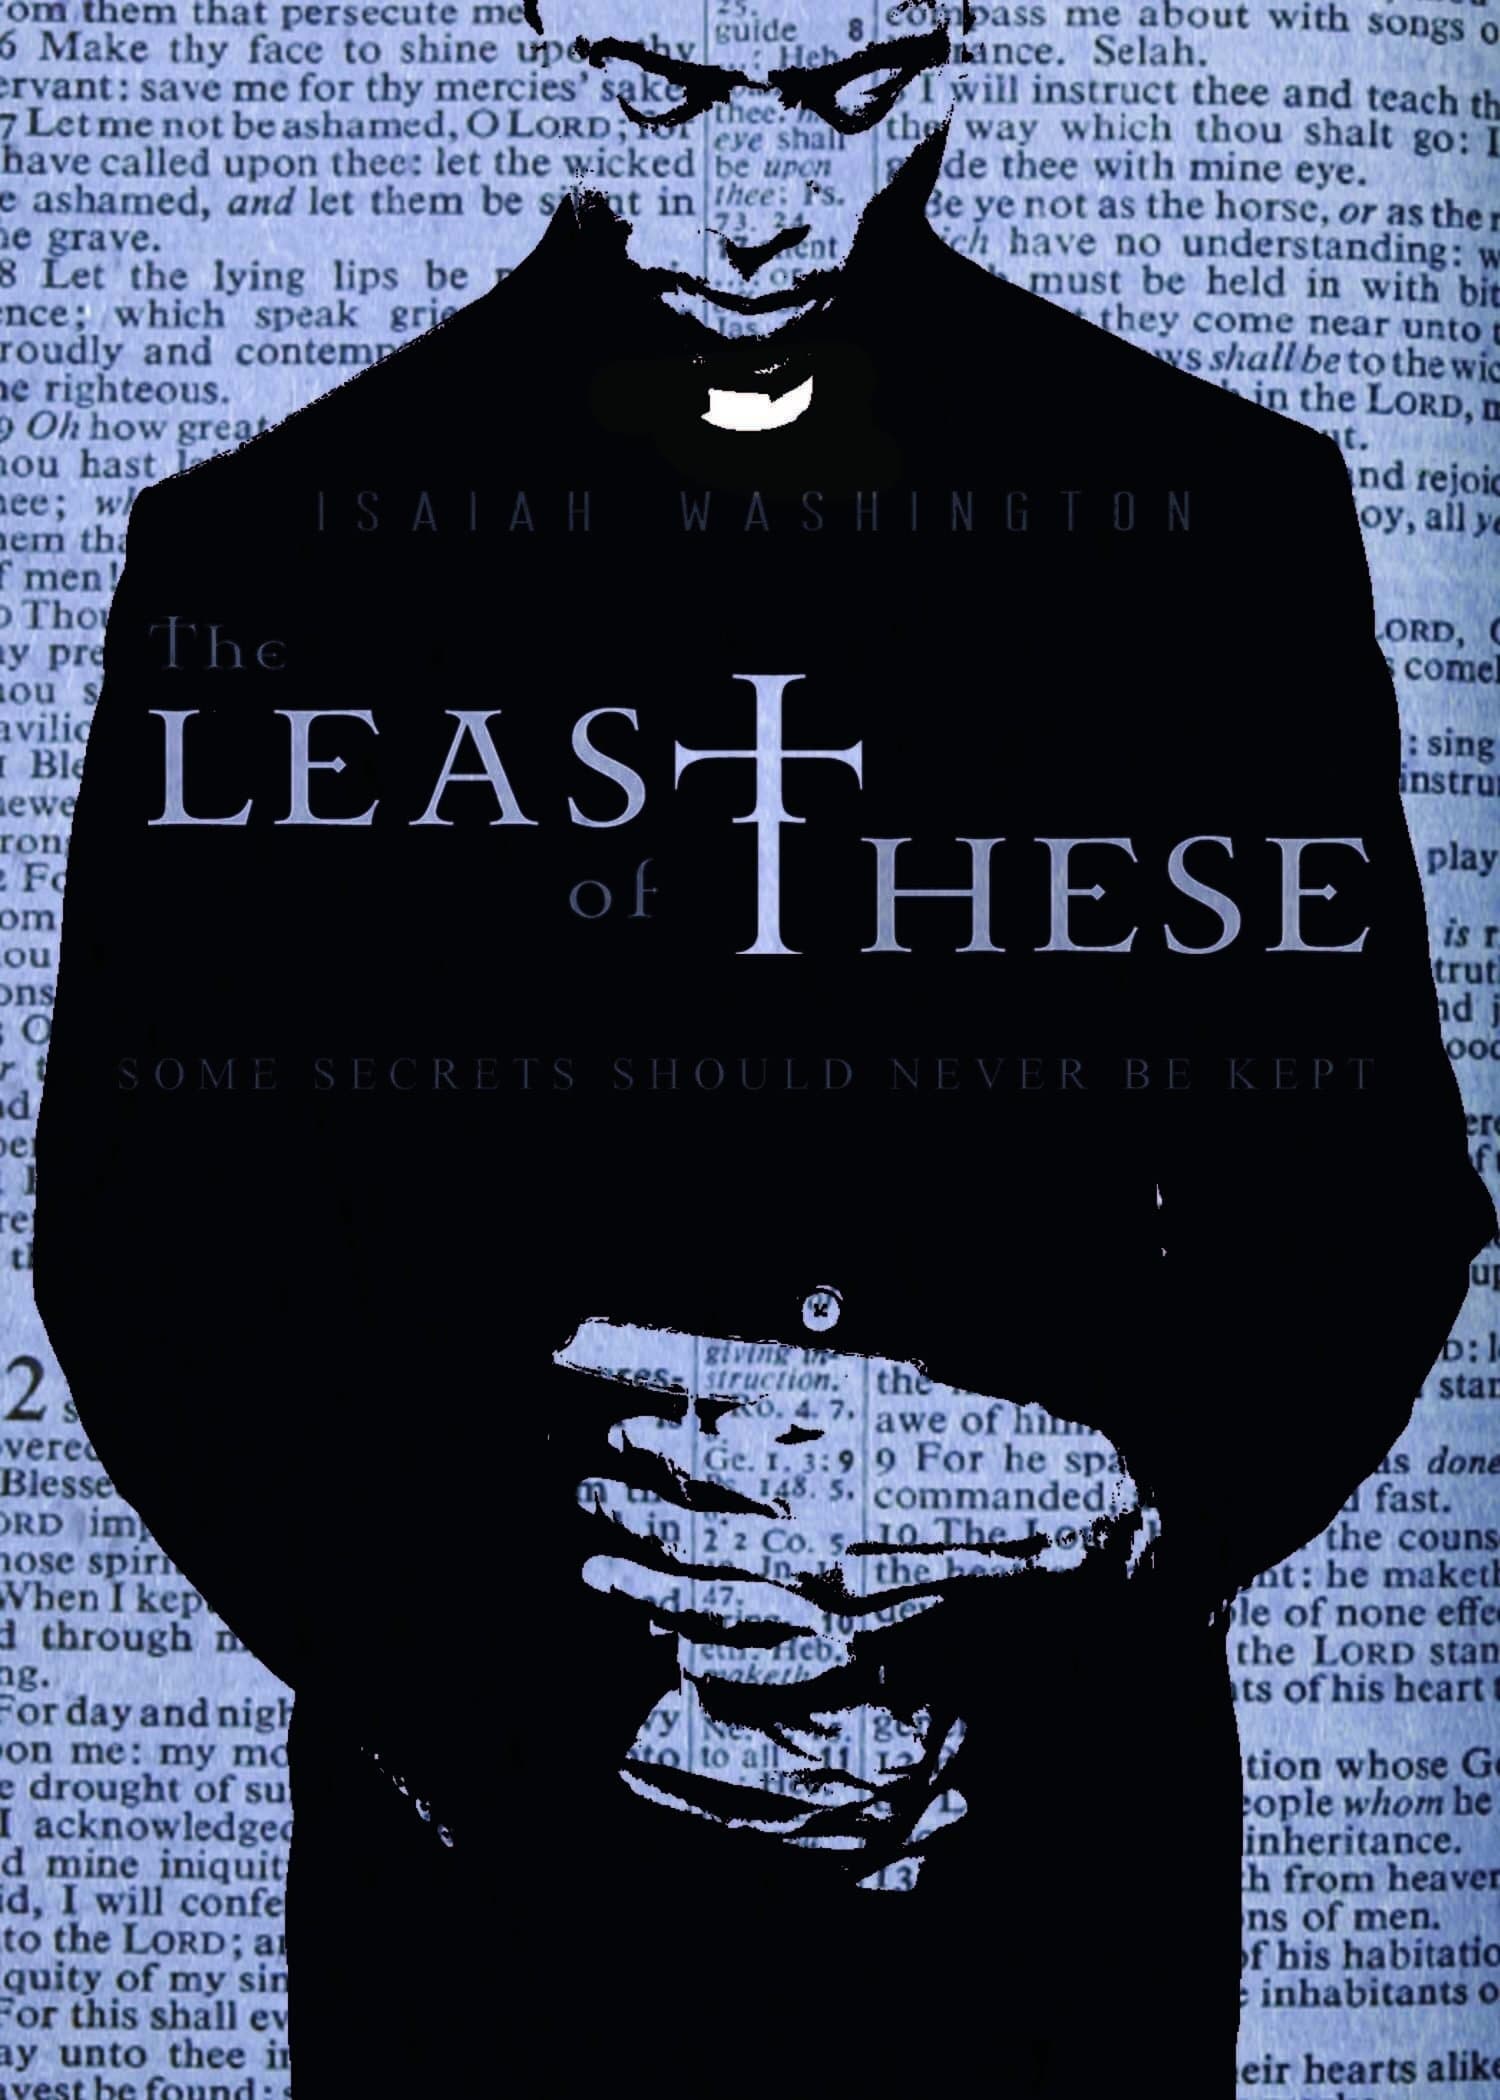 The Least of These (2011)